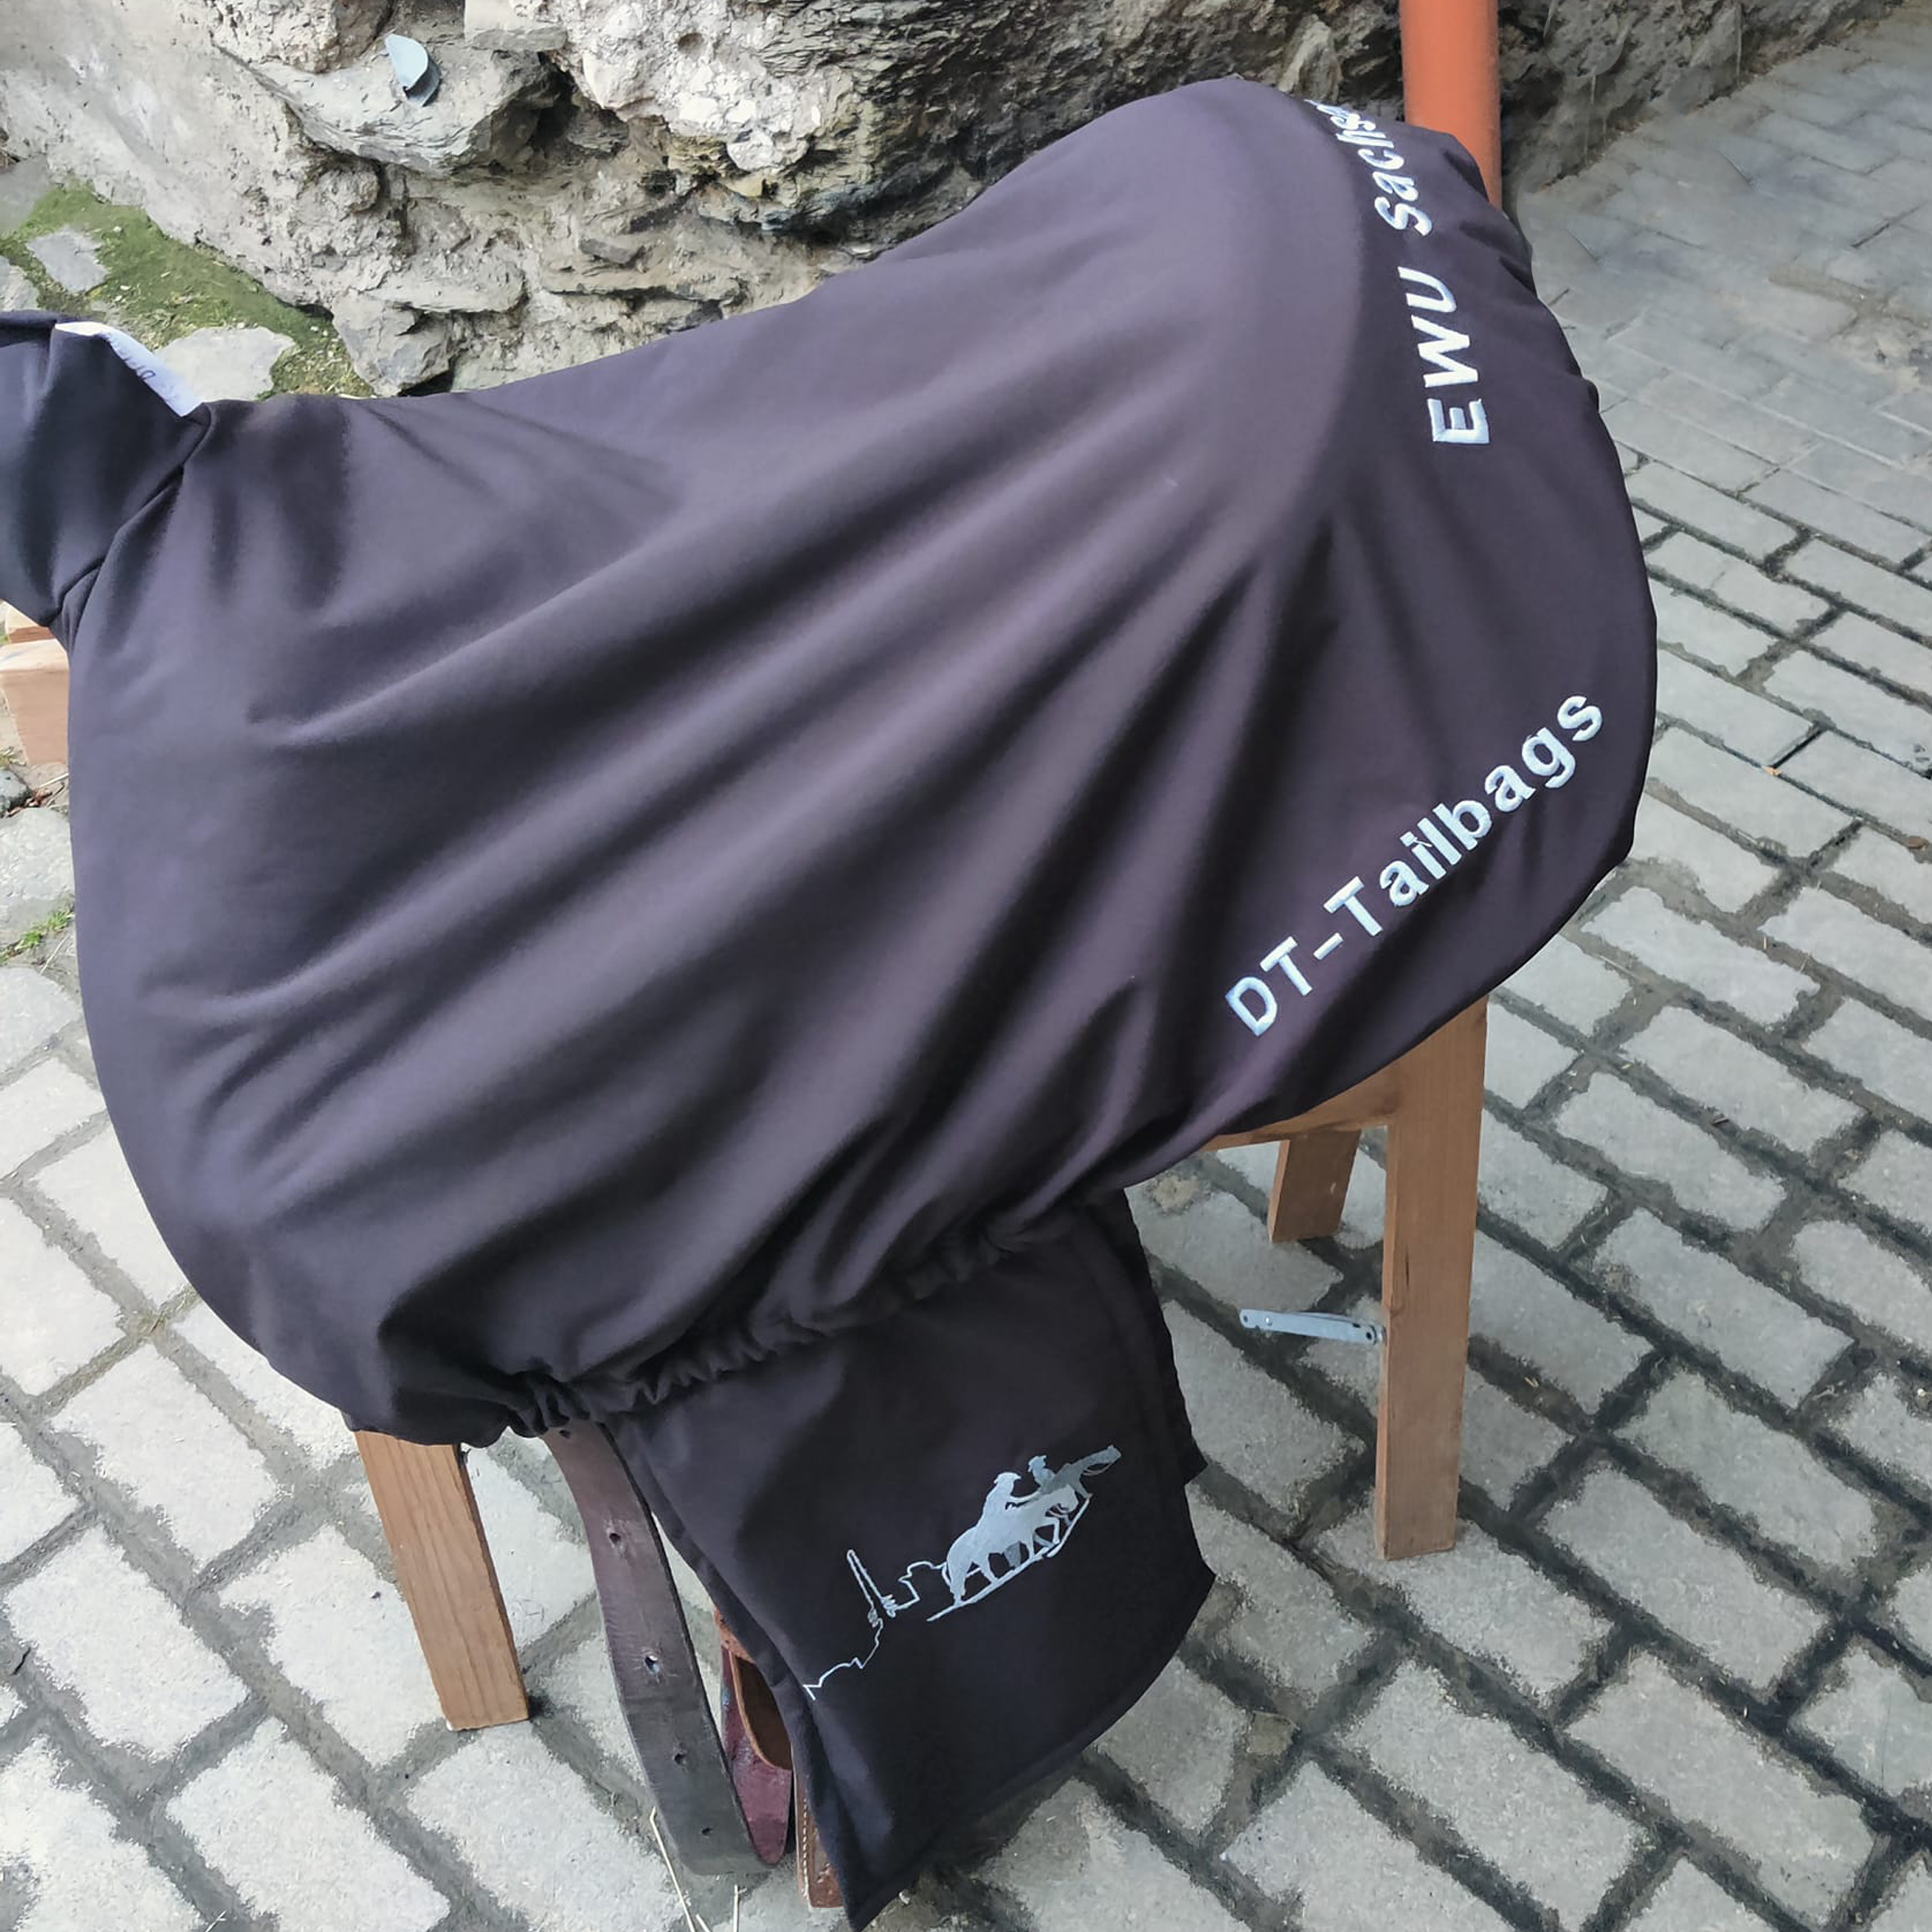 DT Tailbags